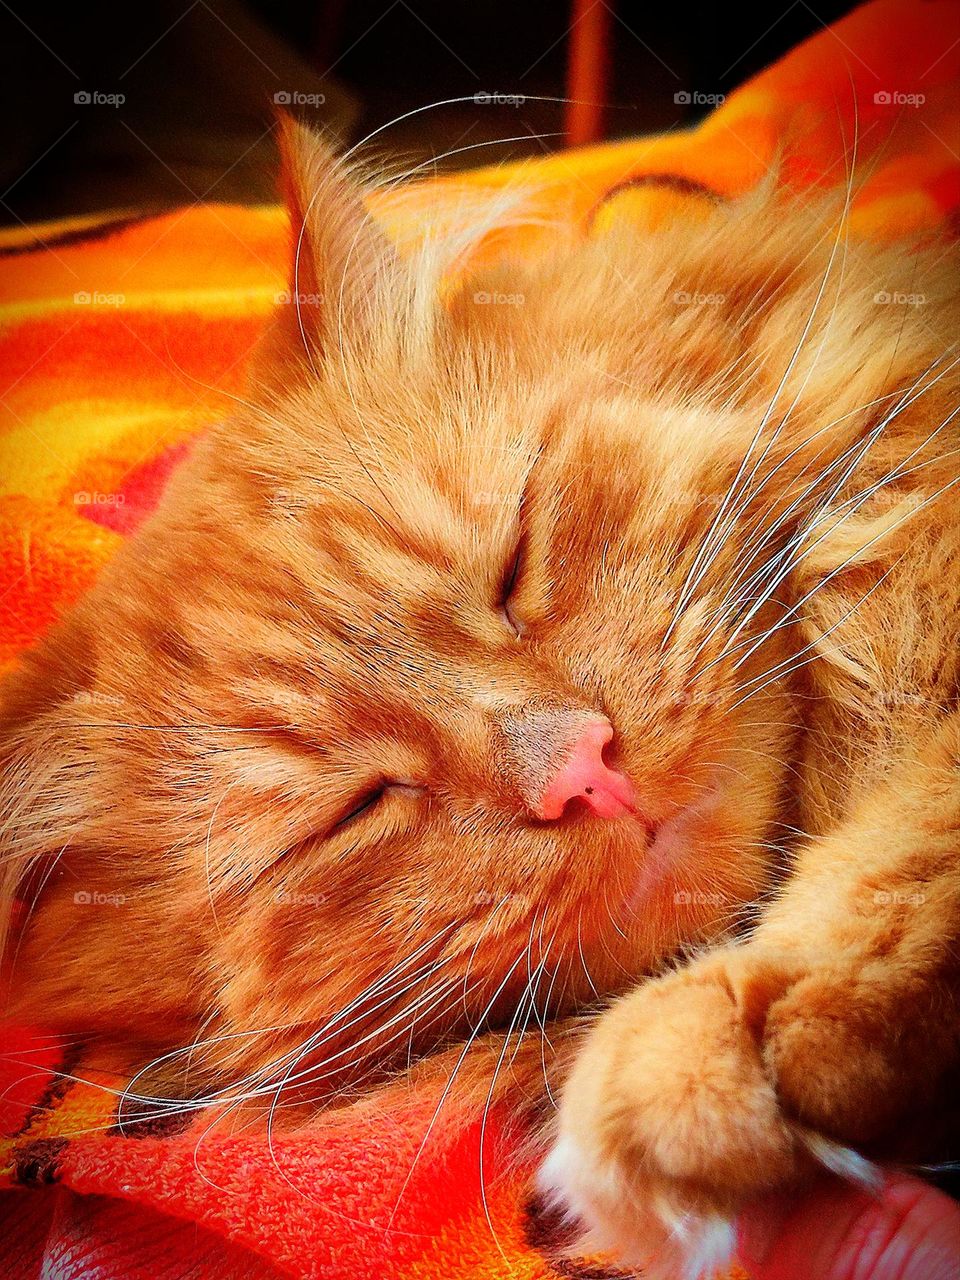 Autumn colors.  Sleeping cat.  The color of the cat is all shades of yellow, orange and red.